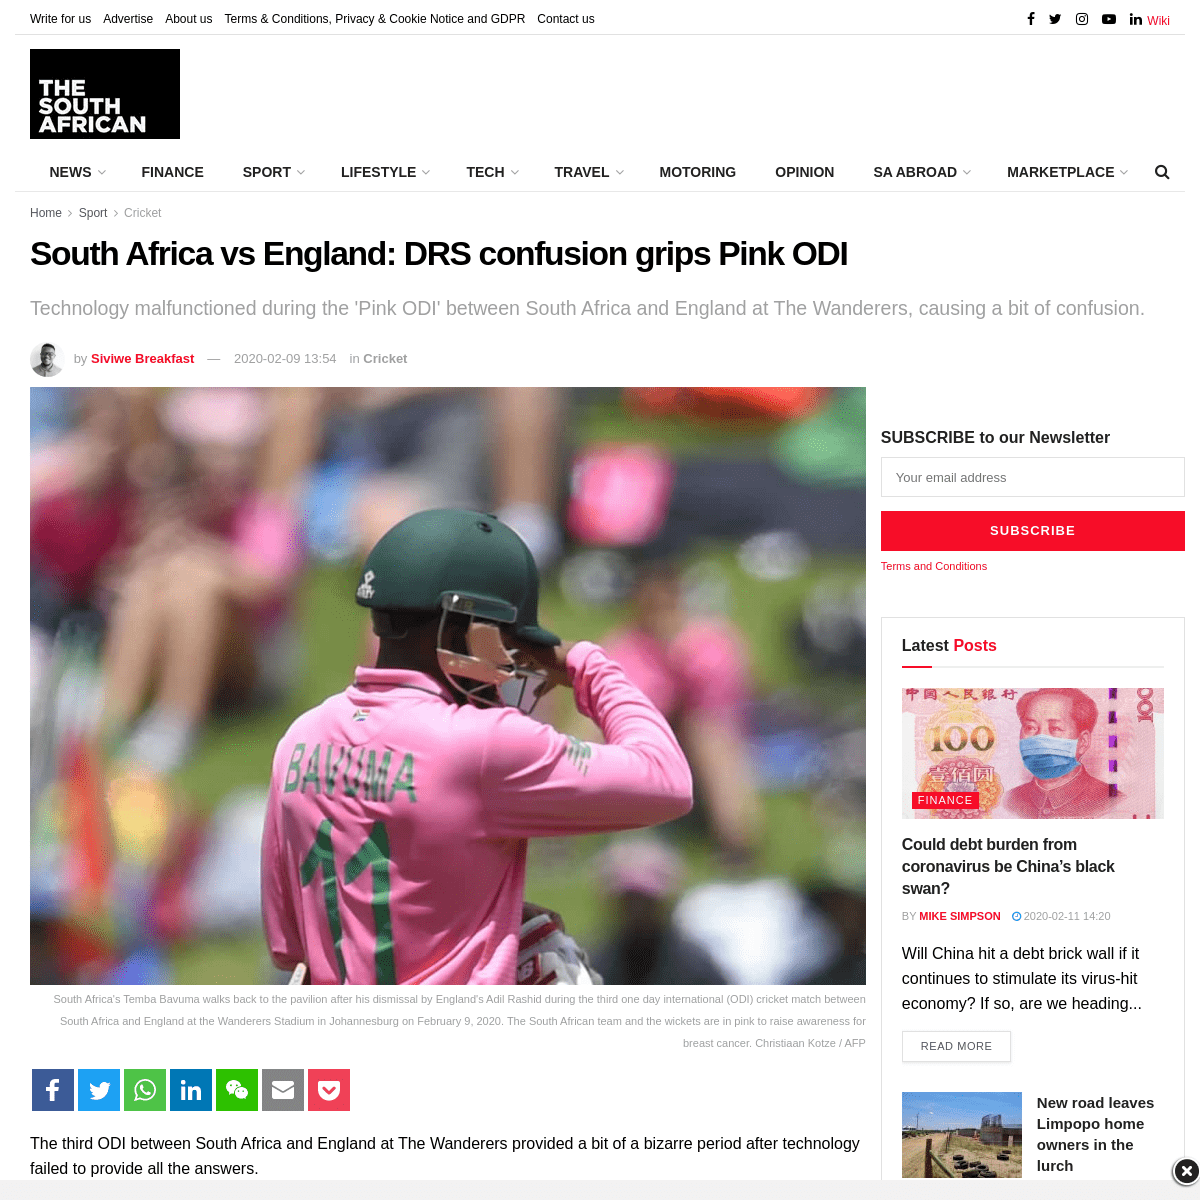 A complete backup of www.thesouthafrican.com/sport/cricket/pink-odi-south-africa-vs-england-drs/